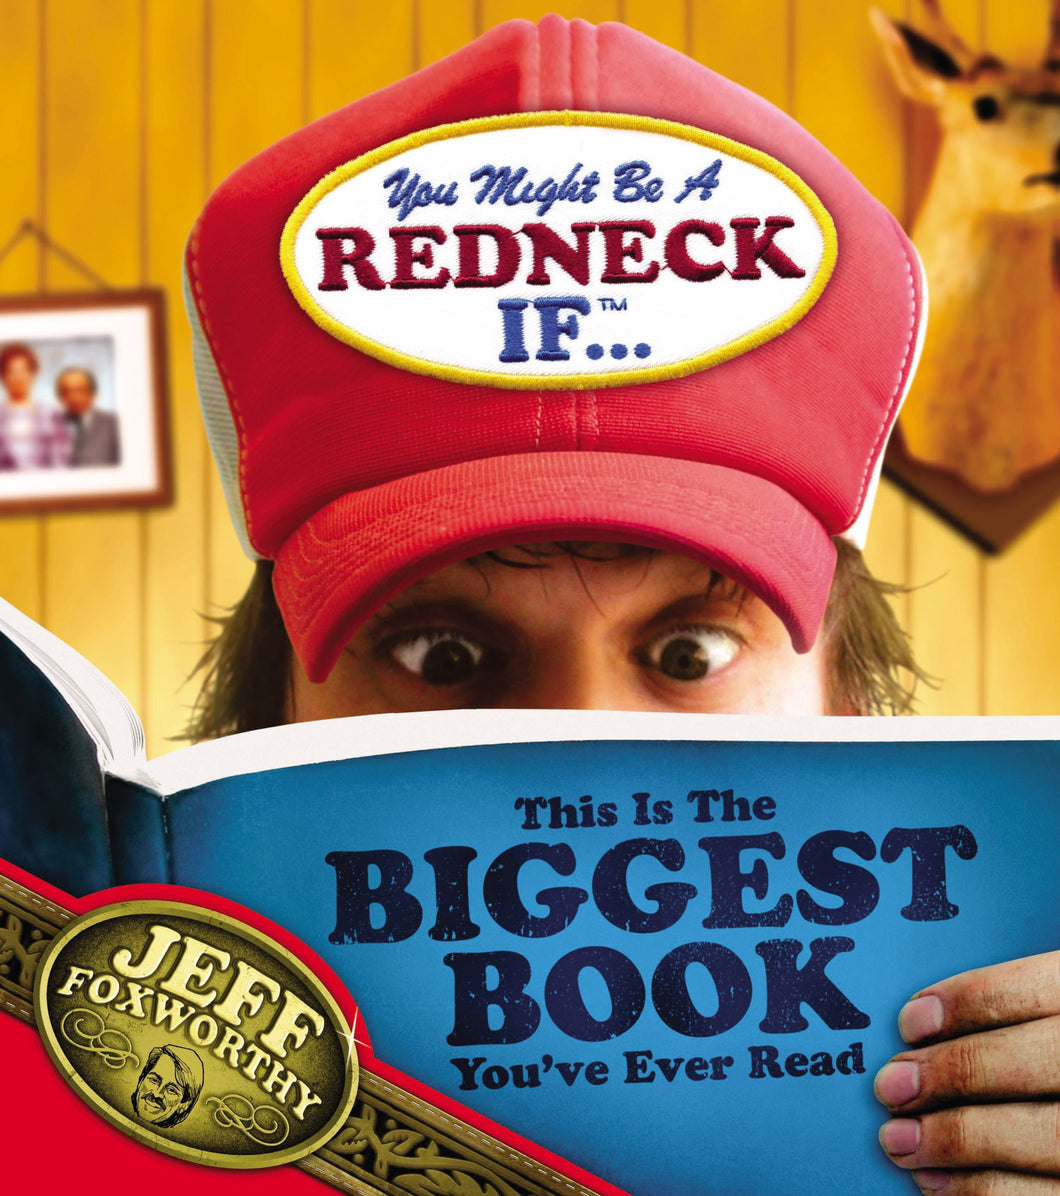 You Might Be A Redneck If ...This Is The Biggest Book You've Ever Read